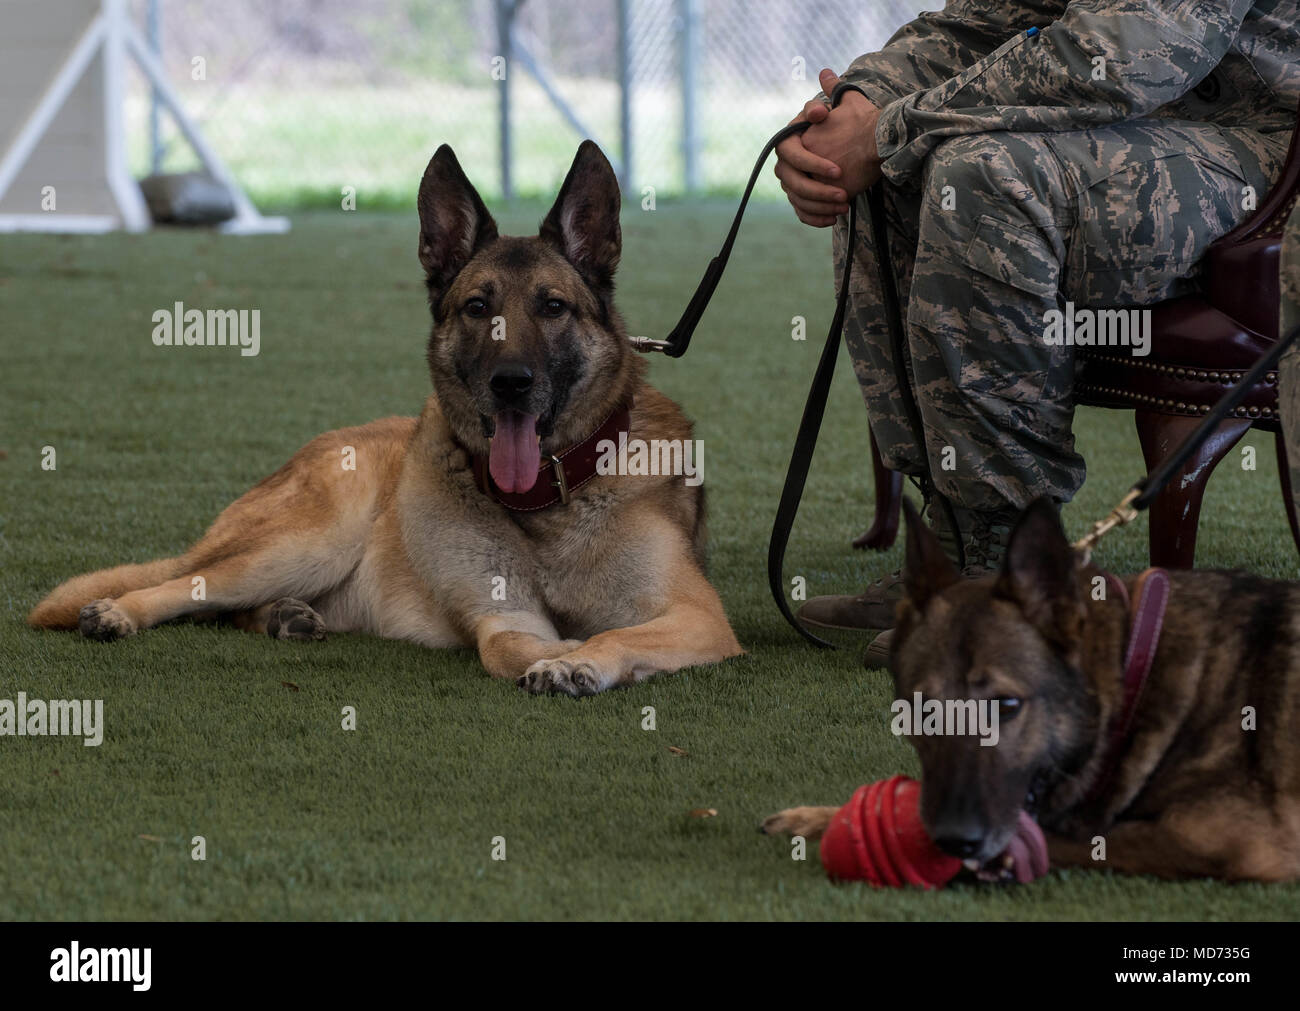 Kuno, 2nd Security Forces Squadron military working dog, lies on the ground after his entrance prior to a MWD retirement ceremony at Barksdale Air Force Base, La., March 16, 2018. The ceremony was held to honor MWD Kuno and MWD Rico for their service at the 2nd SFS. (U.S. Air Force photo by Airman 1st Class Tessa B. Corrick) Stock Photo